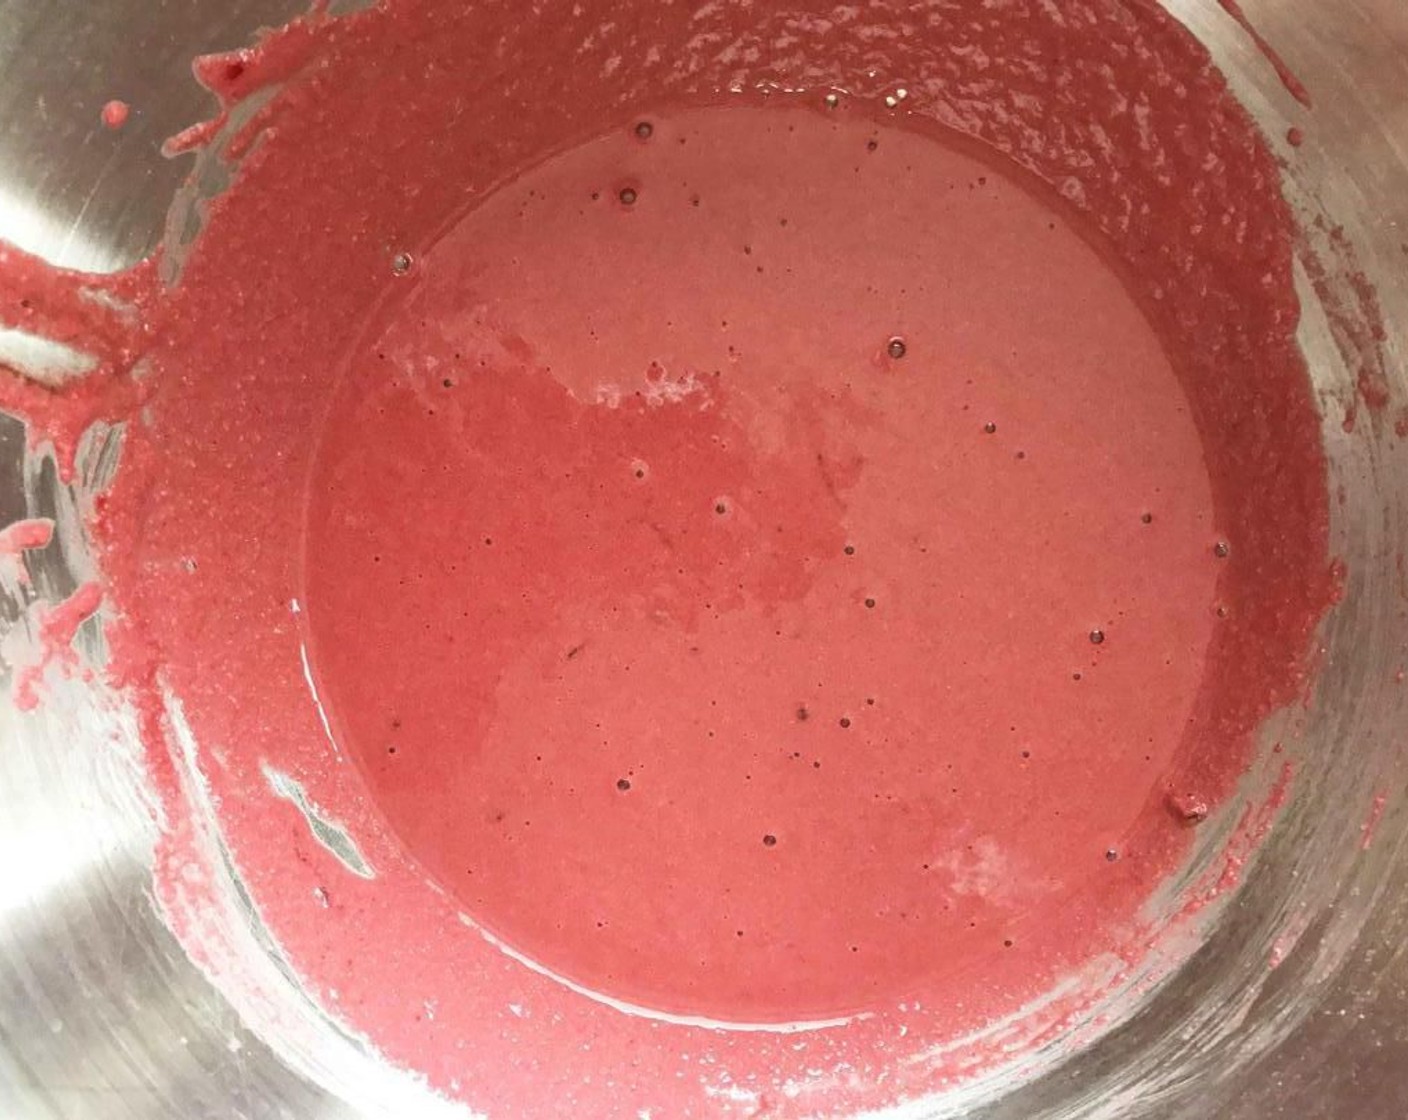 step 3 In another large bowl, whisk together the Pancake Mix (1 cup), Water (1 cup), Red Food Coloring (1 tsp), and Unsweetened Cocoa Powder (1 tsp) until well combined.